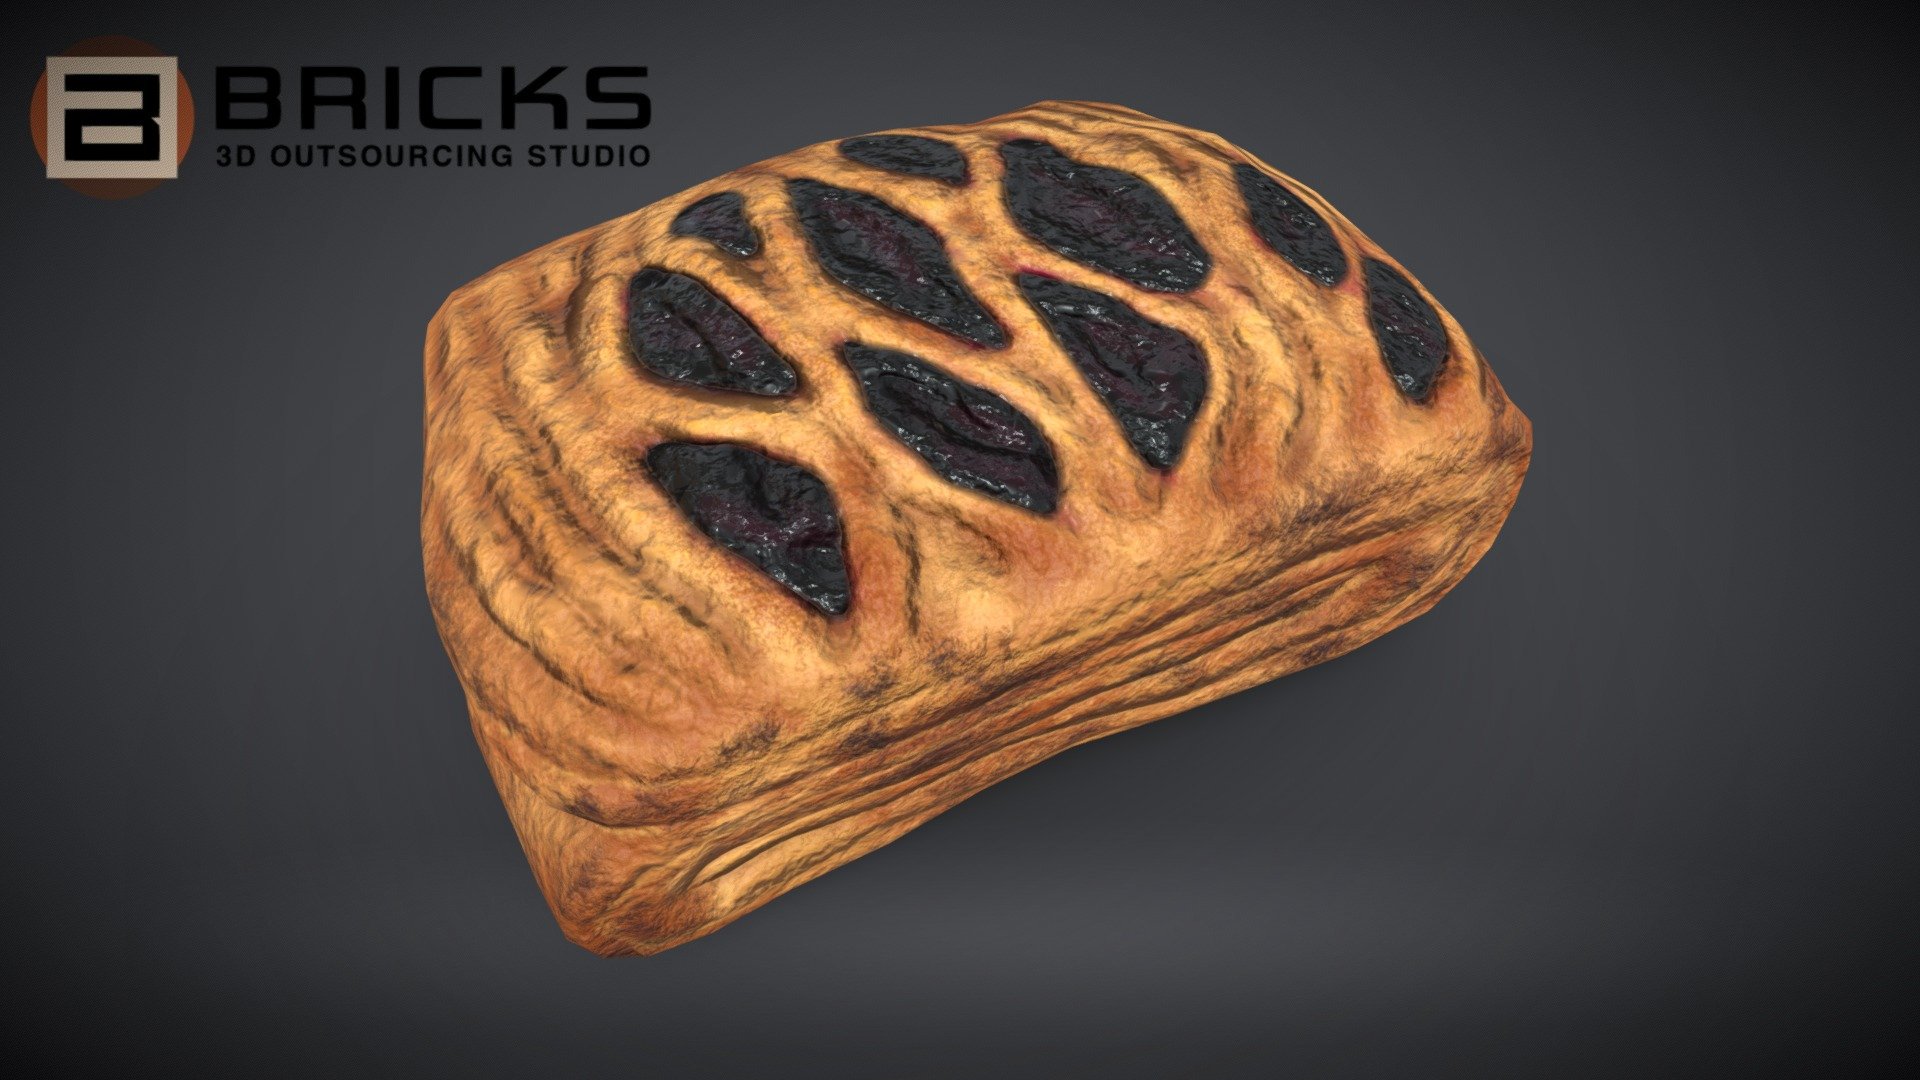 PBR Food Asset:
DanishBlueberry
Polycount: 1052
Vertex count: 613
Texture Size: 2048px x 2048px
Normal: OpenGL

If you need any adjust in file please contact us: team@bricks3dstudio.com

Hire us: tringuyen@bricks3dstudio.com
Here is us: https://www.bricks3dstudio.com/
        https://www.artstation.com/bricksstudio
        https://www.facebook.com/Bricks3dstudio/
        https://www.linkedin.com/in/bricks-studio-b10462252/ - DanishBlueberry - Buy Royalty Free 3D model by Bricks Studio (@bricks3dstudio) 3d model